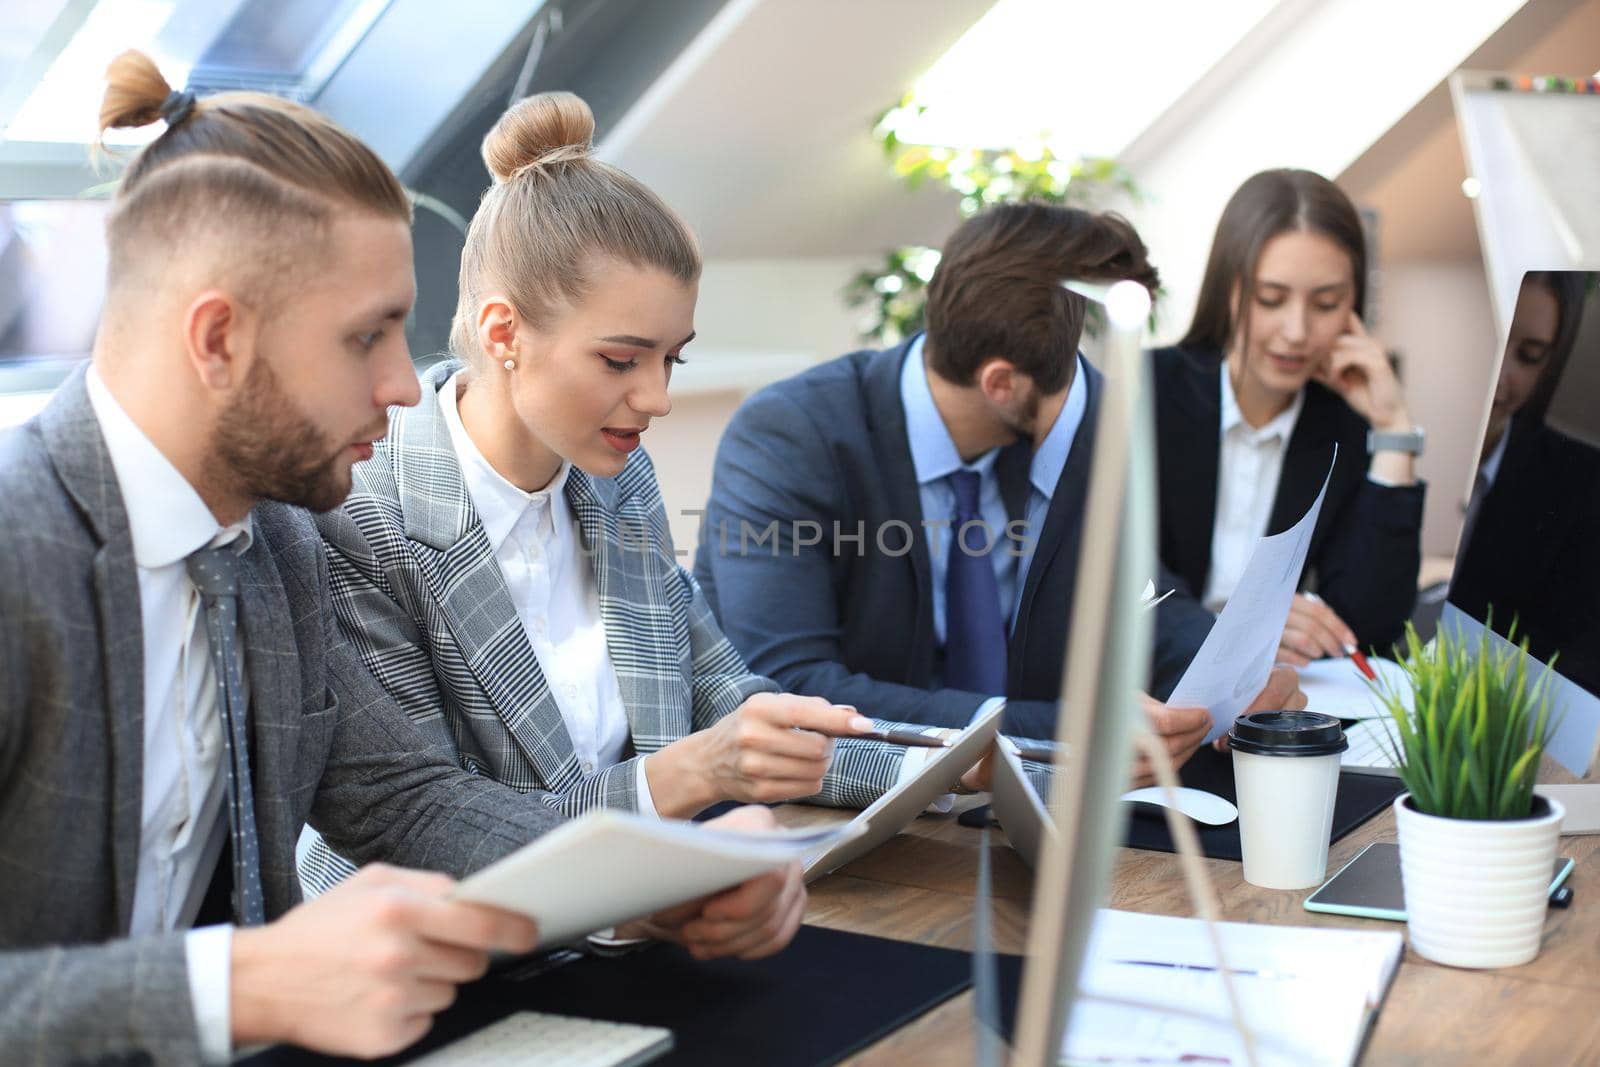 Group of young business people working, communicating while sitting at the office desk together with colleagues